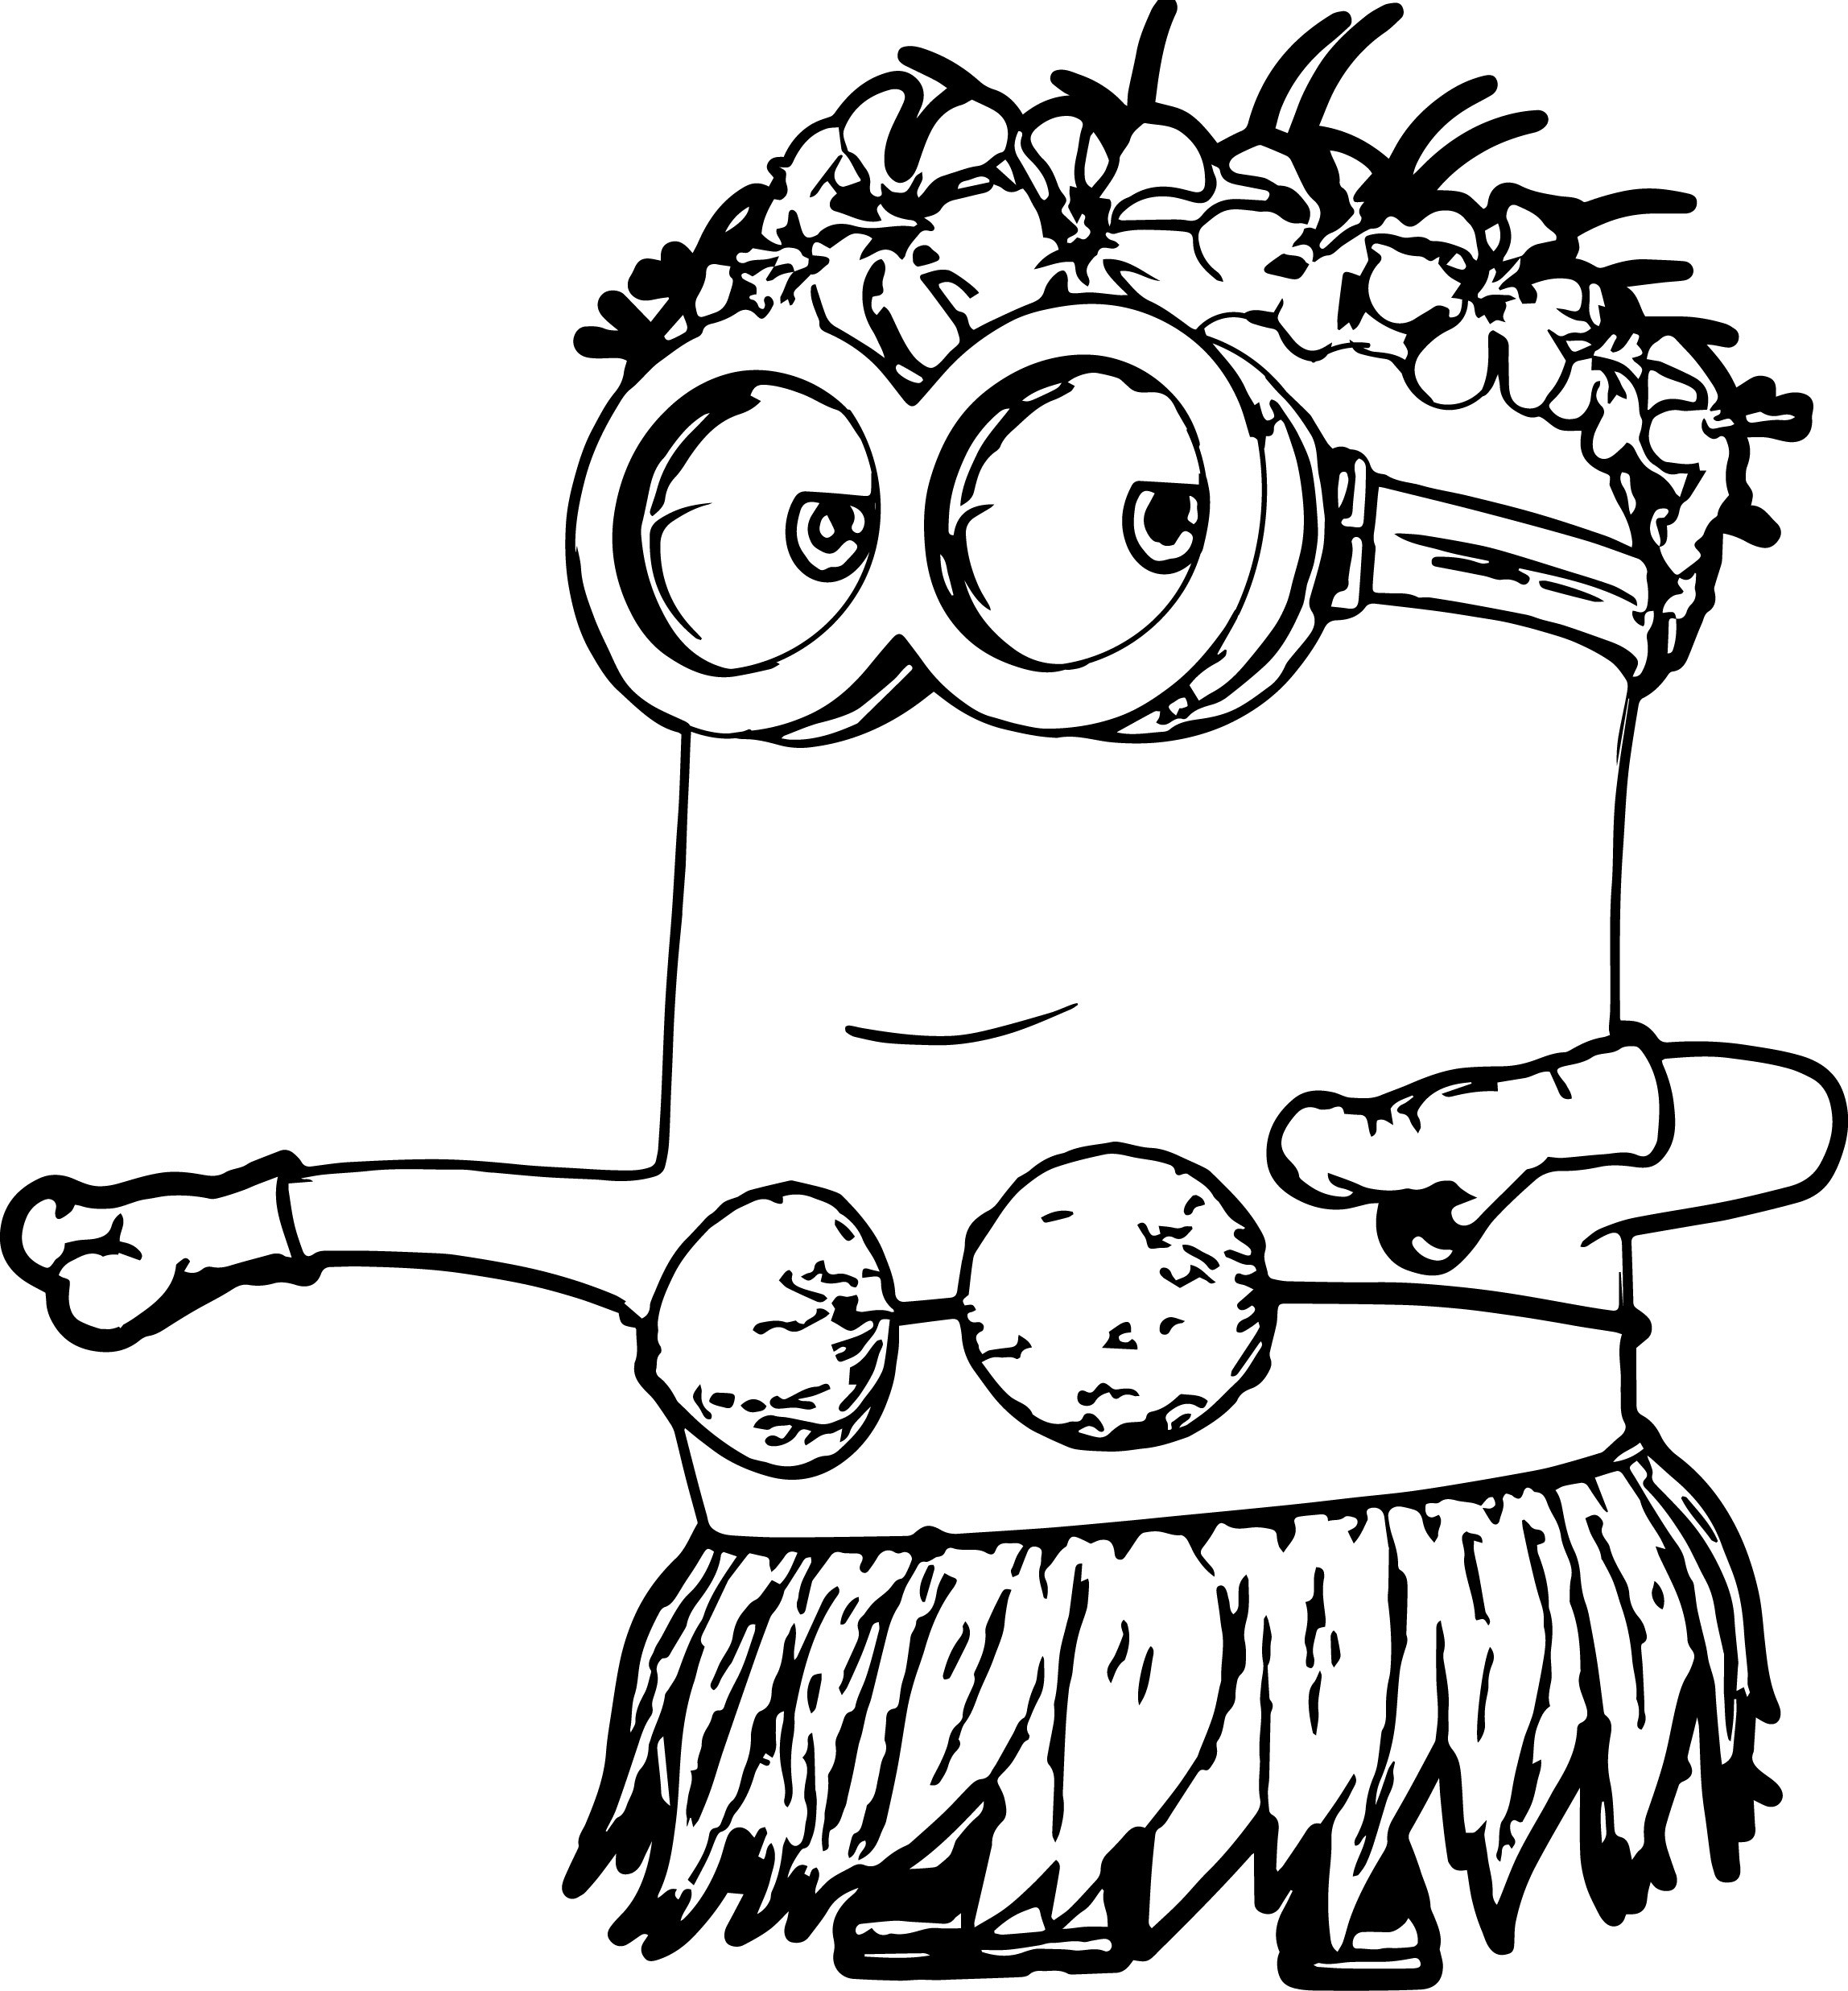 Minions Coloring Pages Printable
 Minion Coloring Pages Best Coloring Pages For Kids